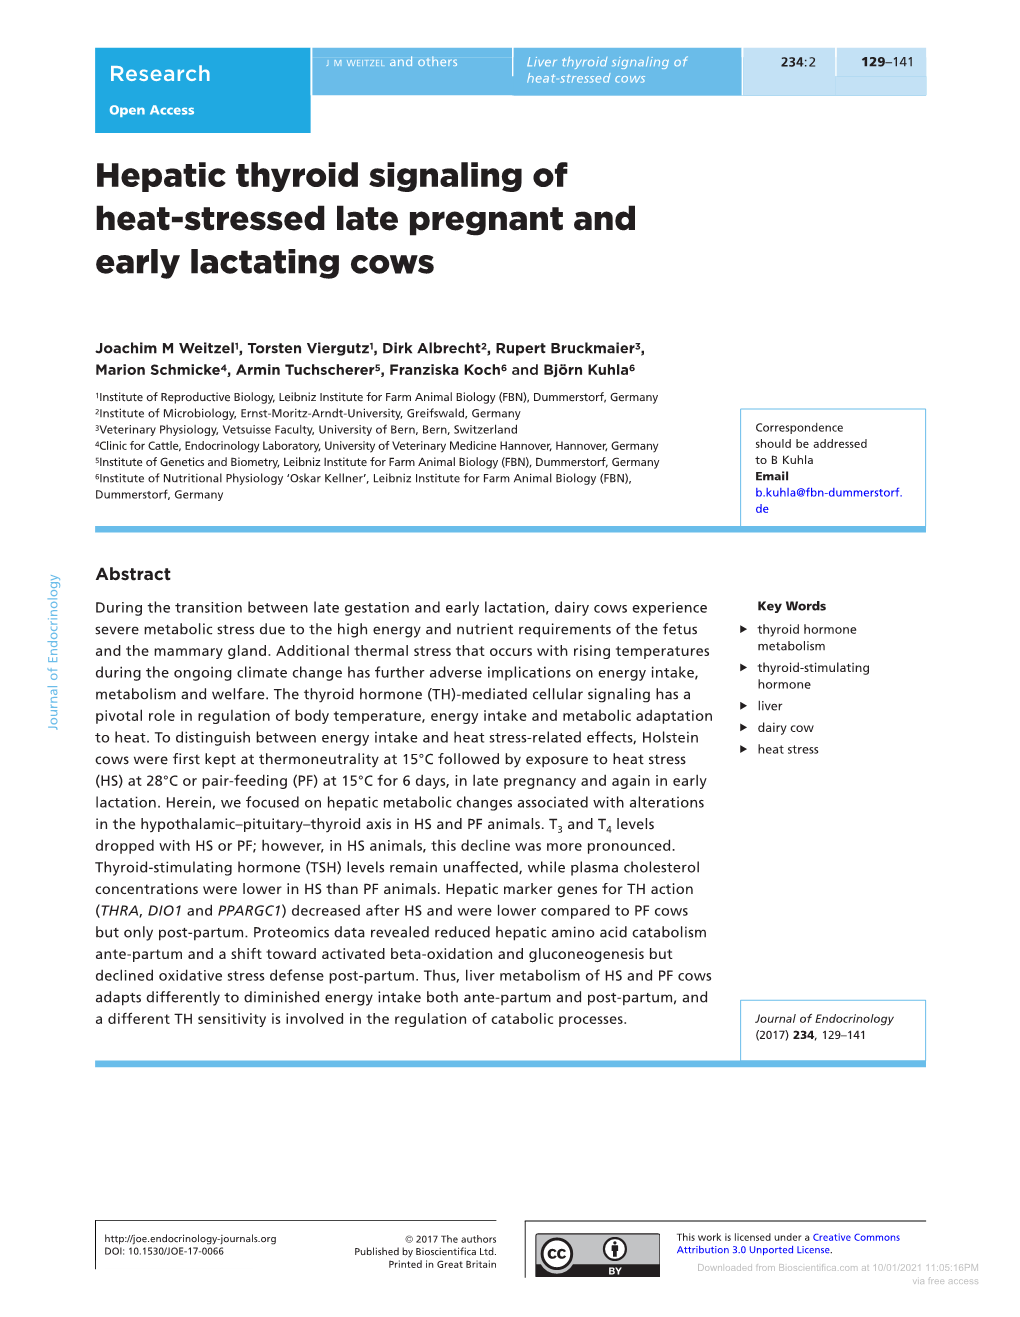 Hepatic Thyroid Signaling of Heat-Stressed Late Pregnant And